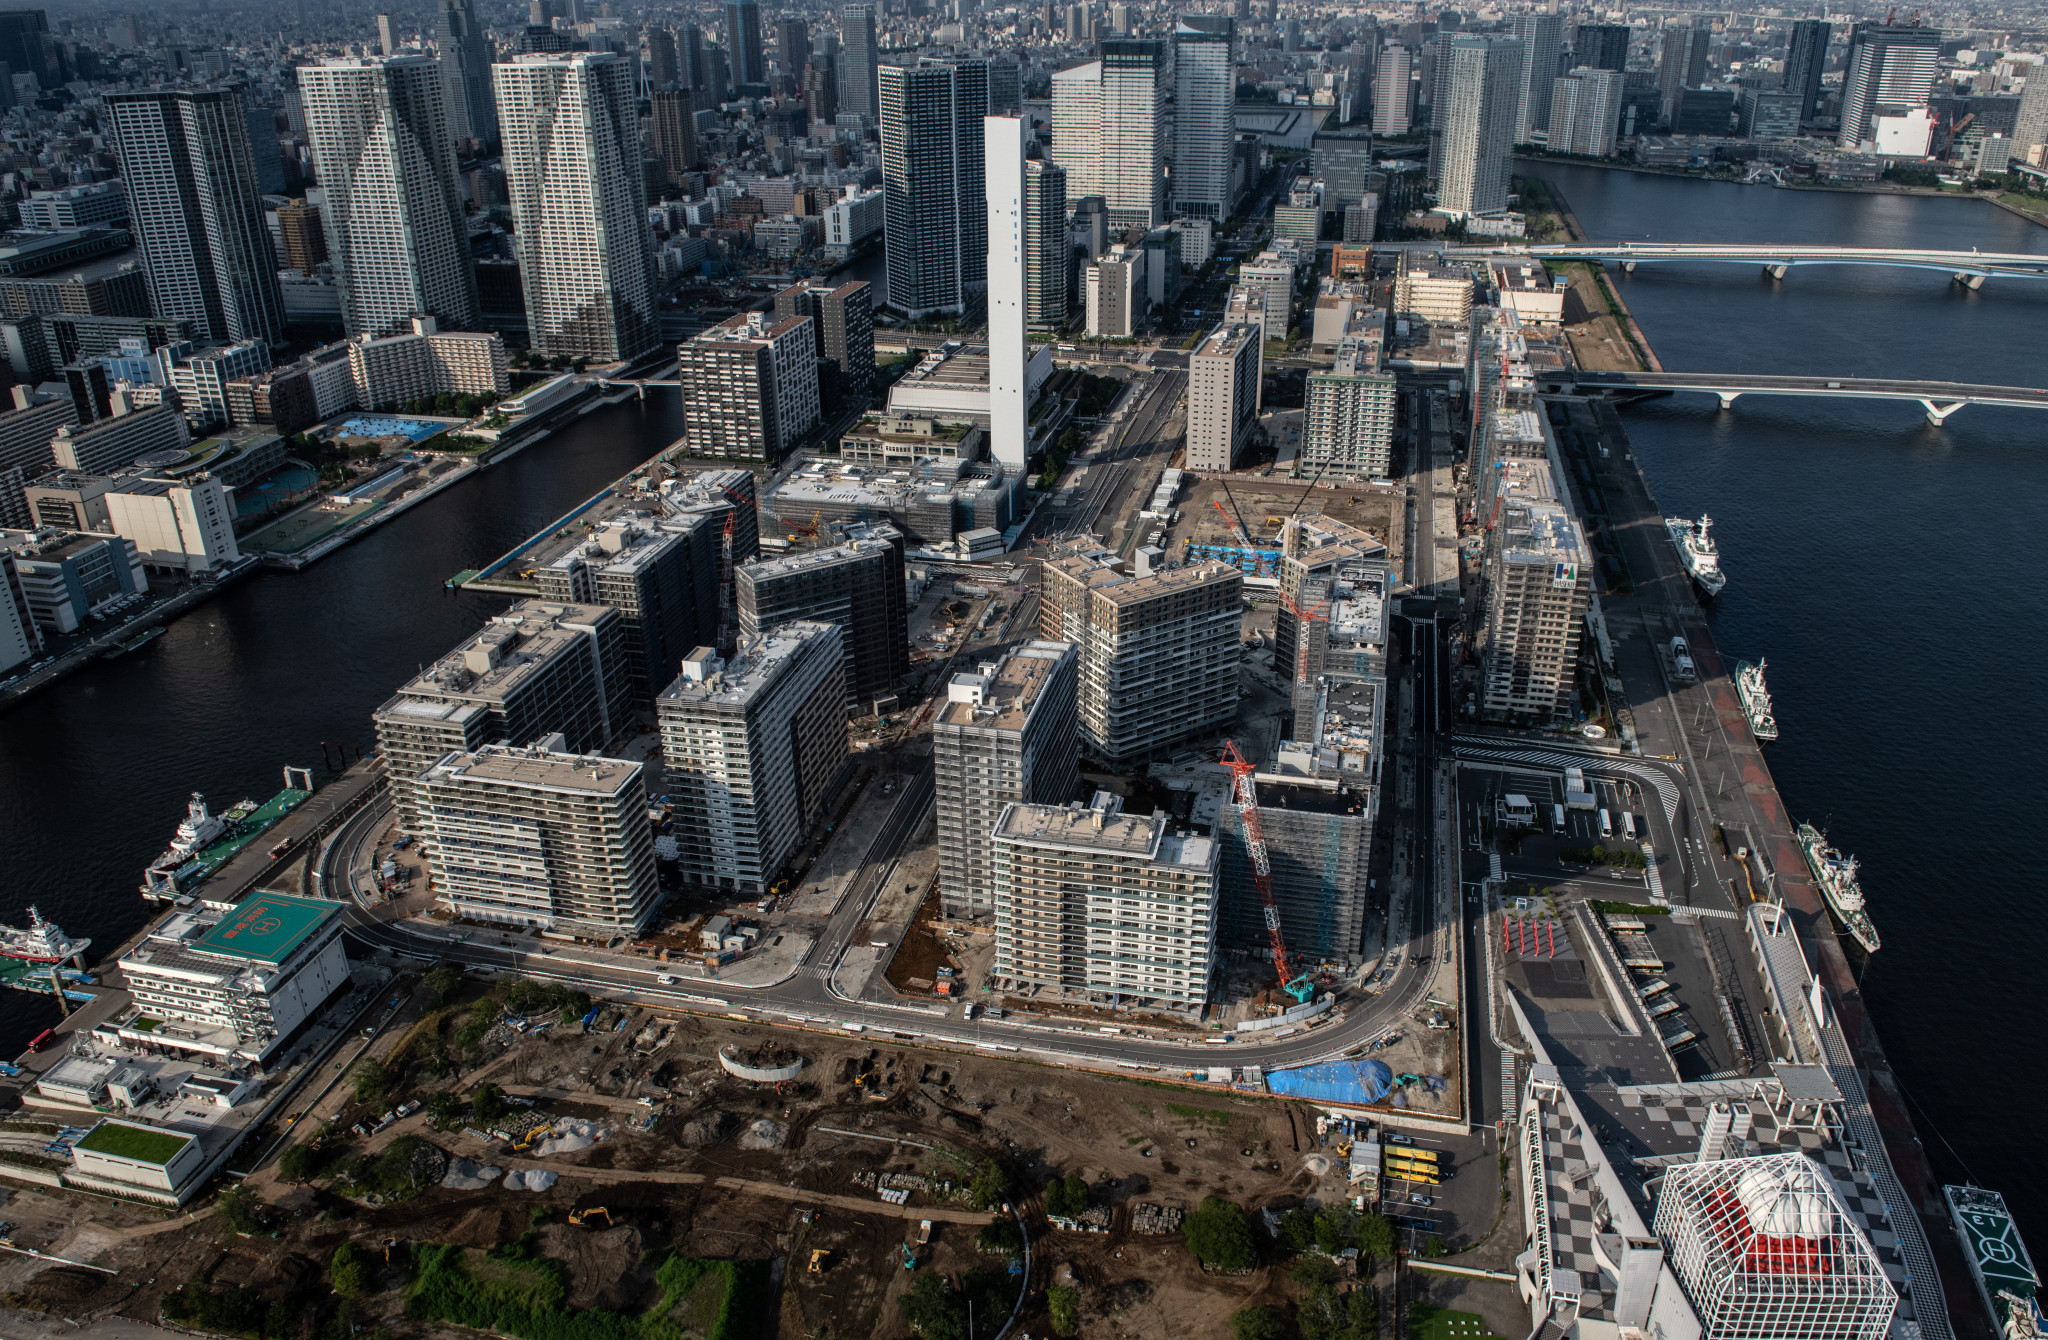 Tokyo 2020 developers sued for delayed handover of Athletes' Village apartments